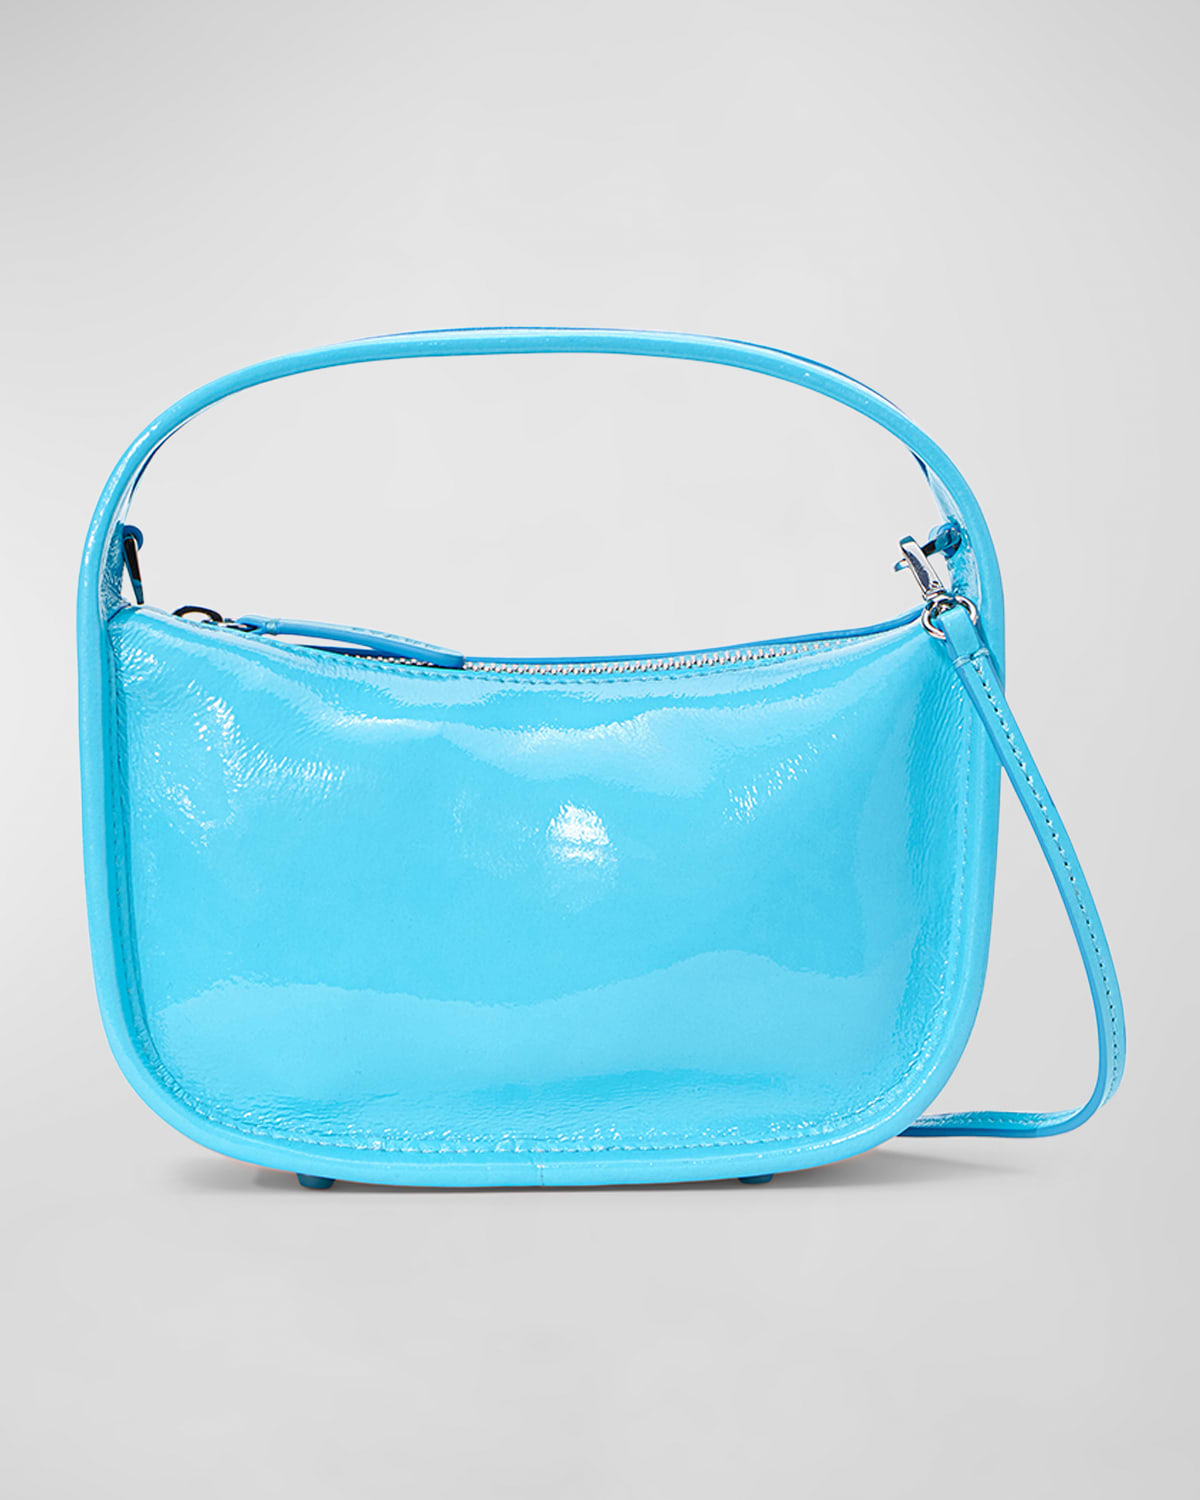 Staud Venice Convertible Patent Leather Crossbody Bag In Pacific